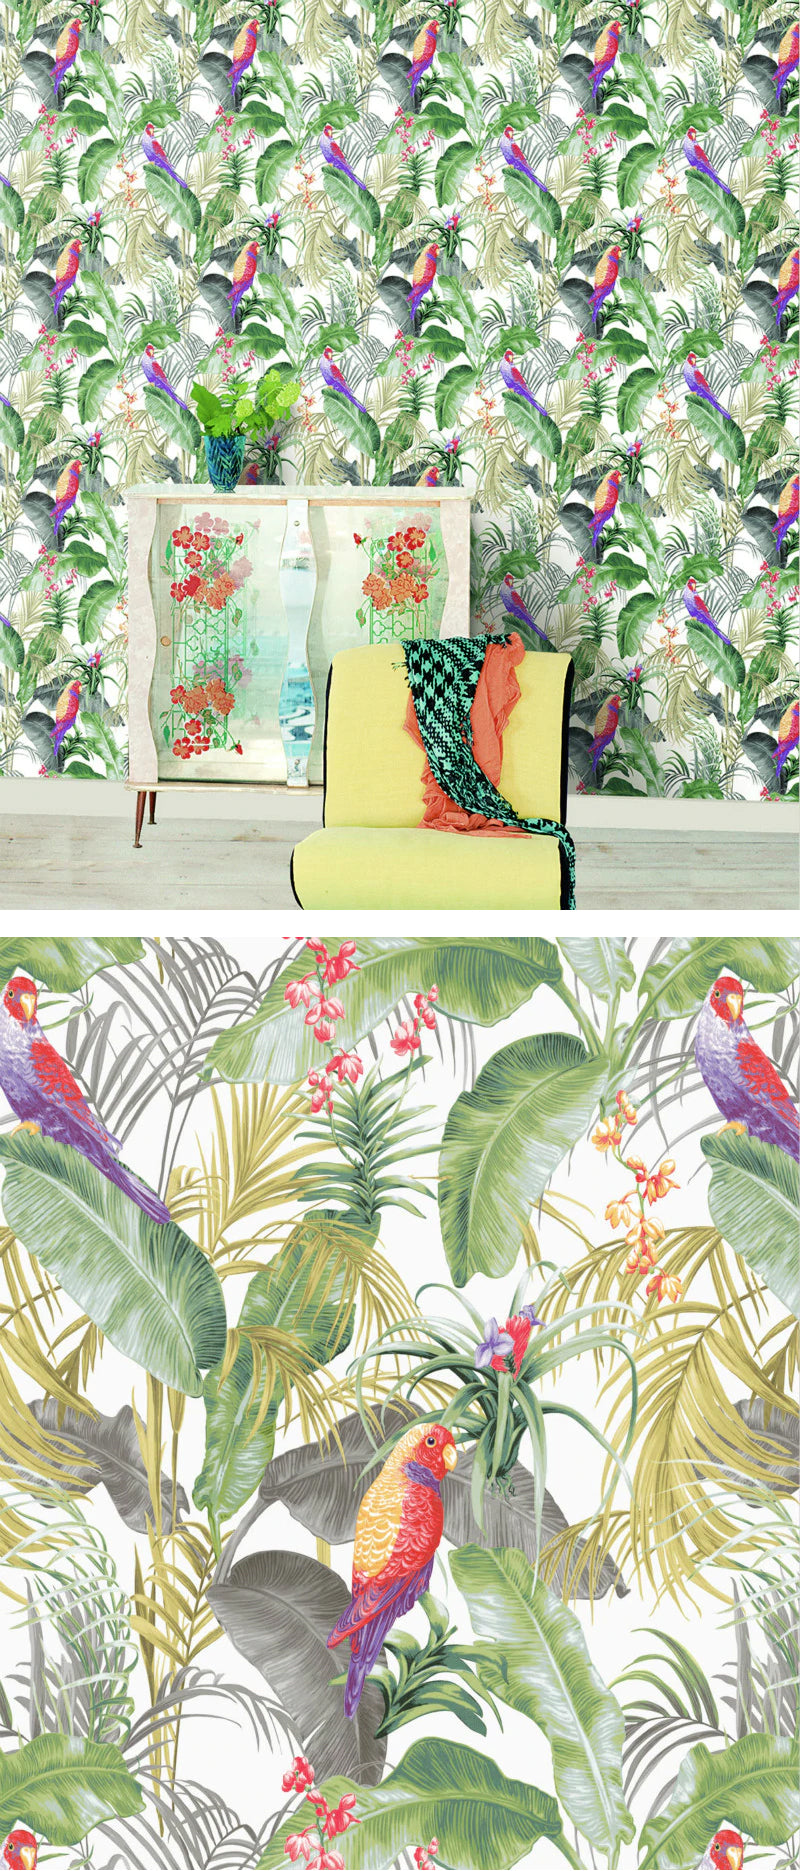 Tropical Vintage Chinoiserie Wallpaper Birds Of Paradise Garden Botany Wall Art Living Room Decoration Printed PVC Wallpaper (10mtr Roll)